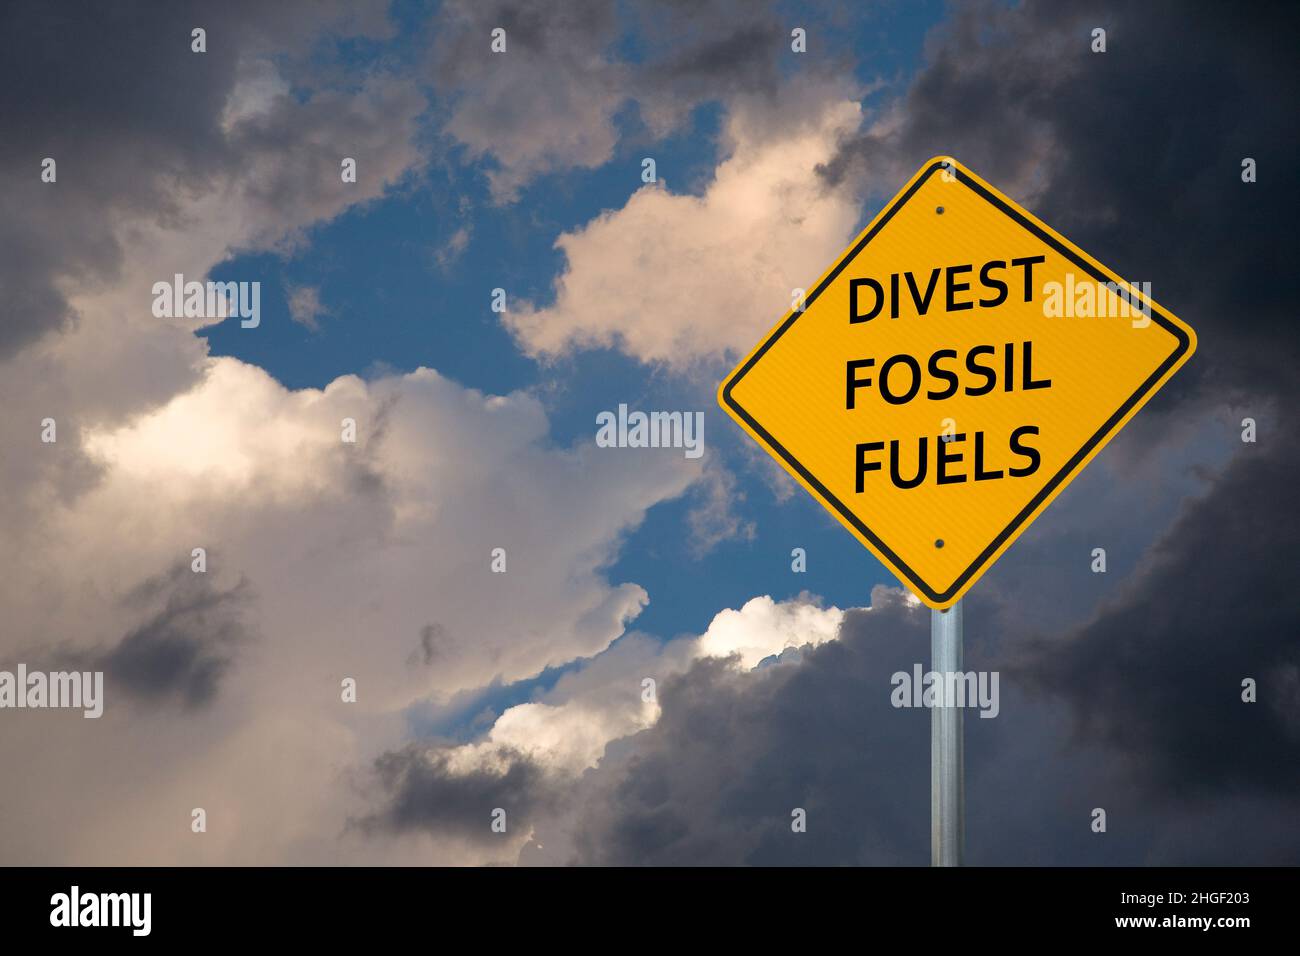 Divest Fossil Fuels Stock Photo